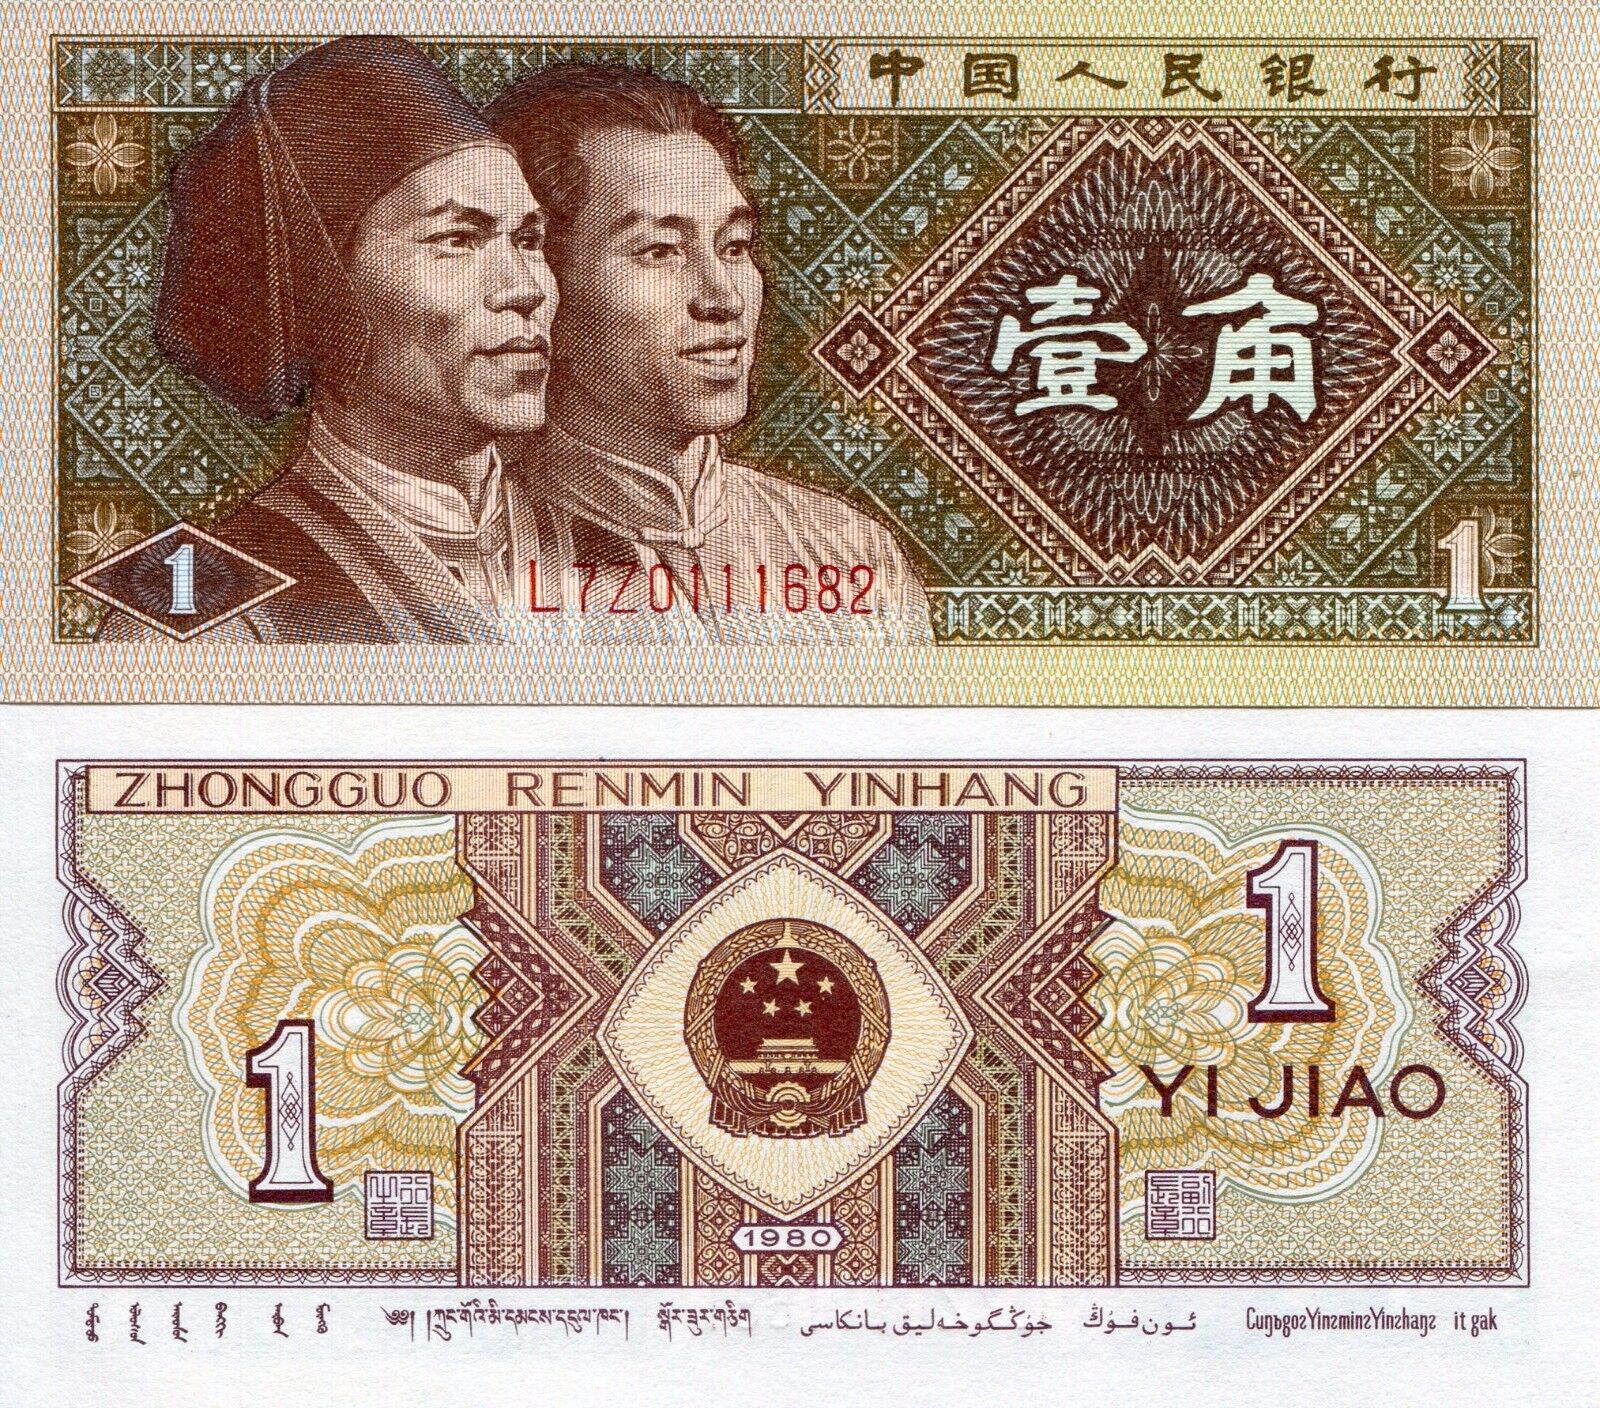 Banknote China Chinese PRC 1 Jiao 1980 Communist Currency UNC Yuan Uncirculated